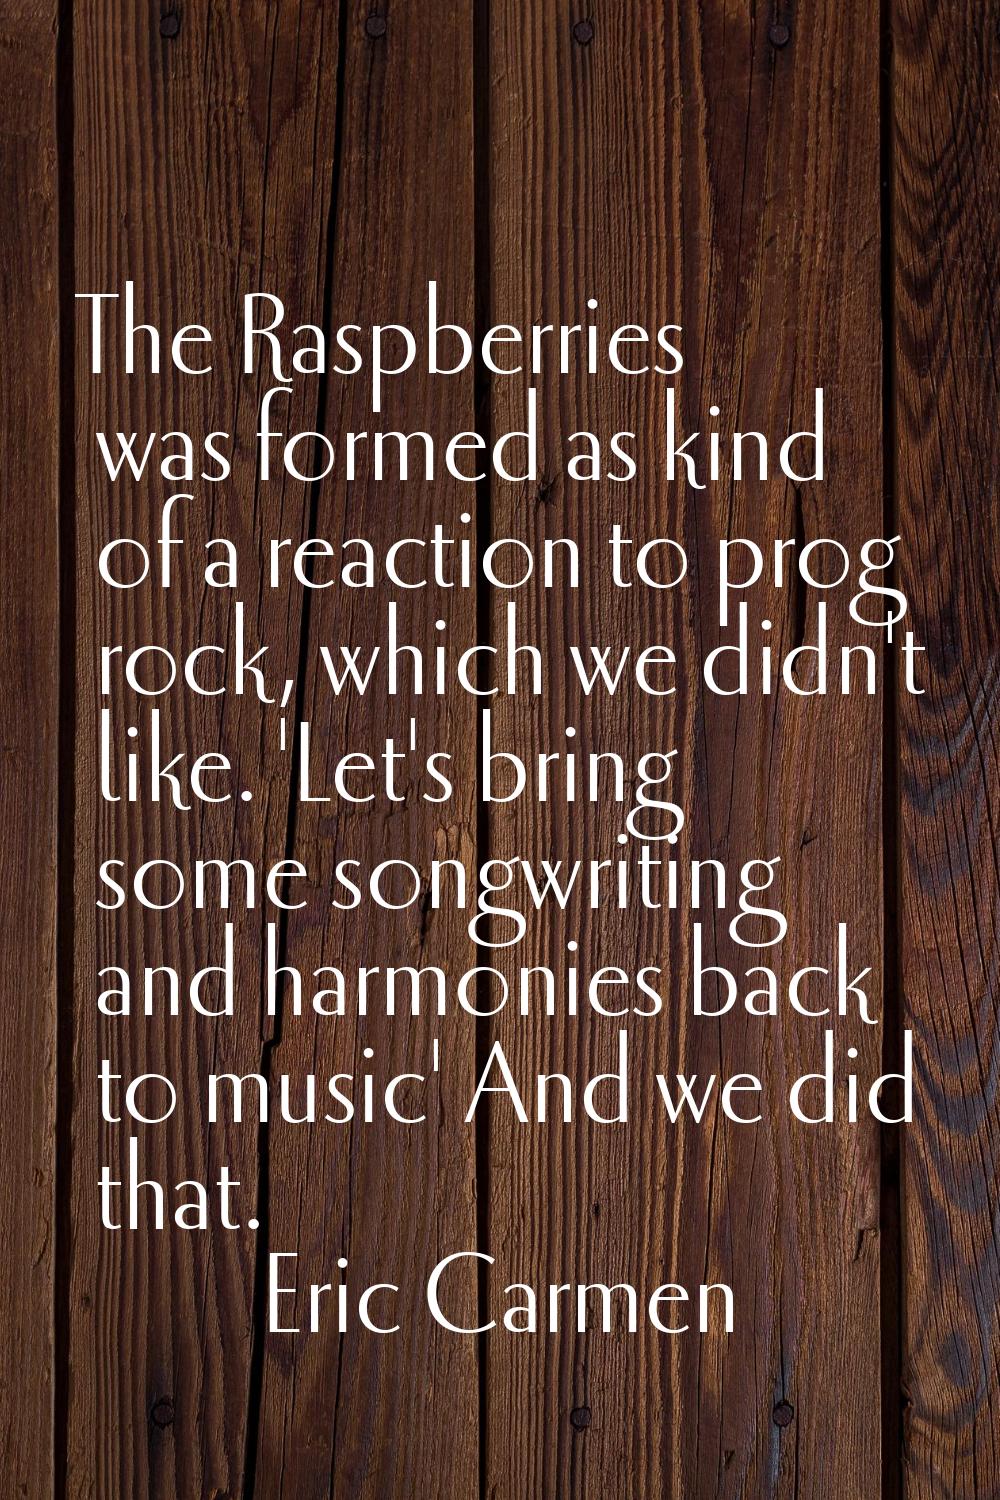 The Raspberries was formed as kind of a reaction to prog rock, which we didn't like. 'Let's bring s